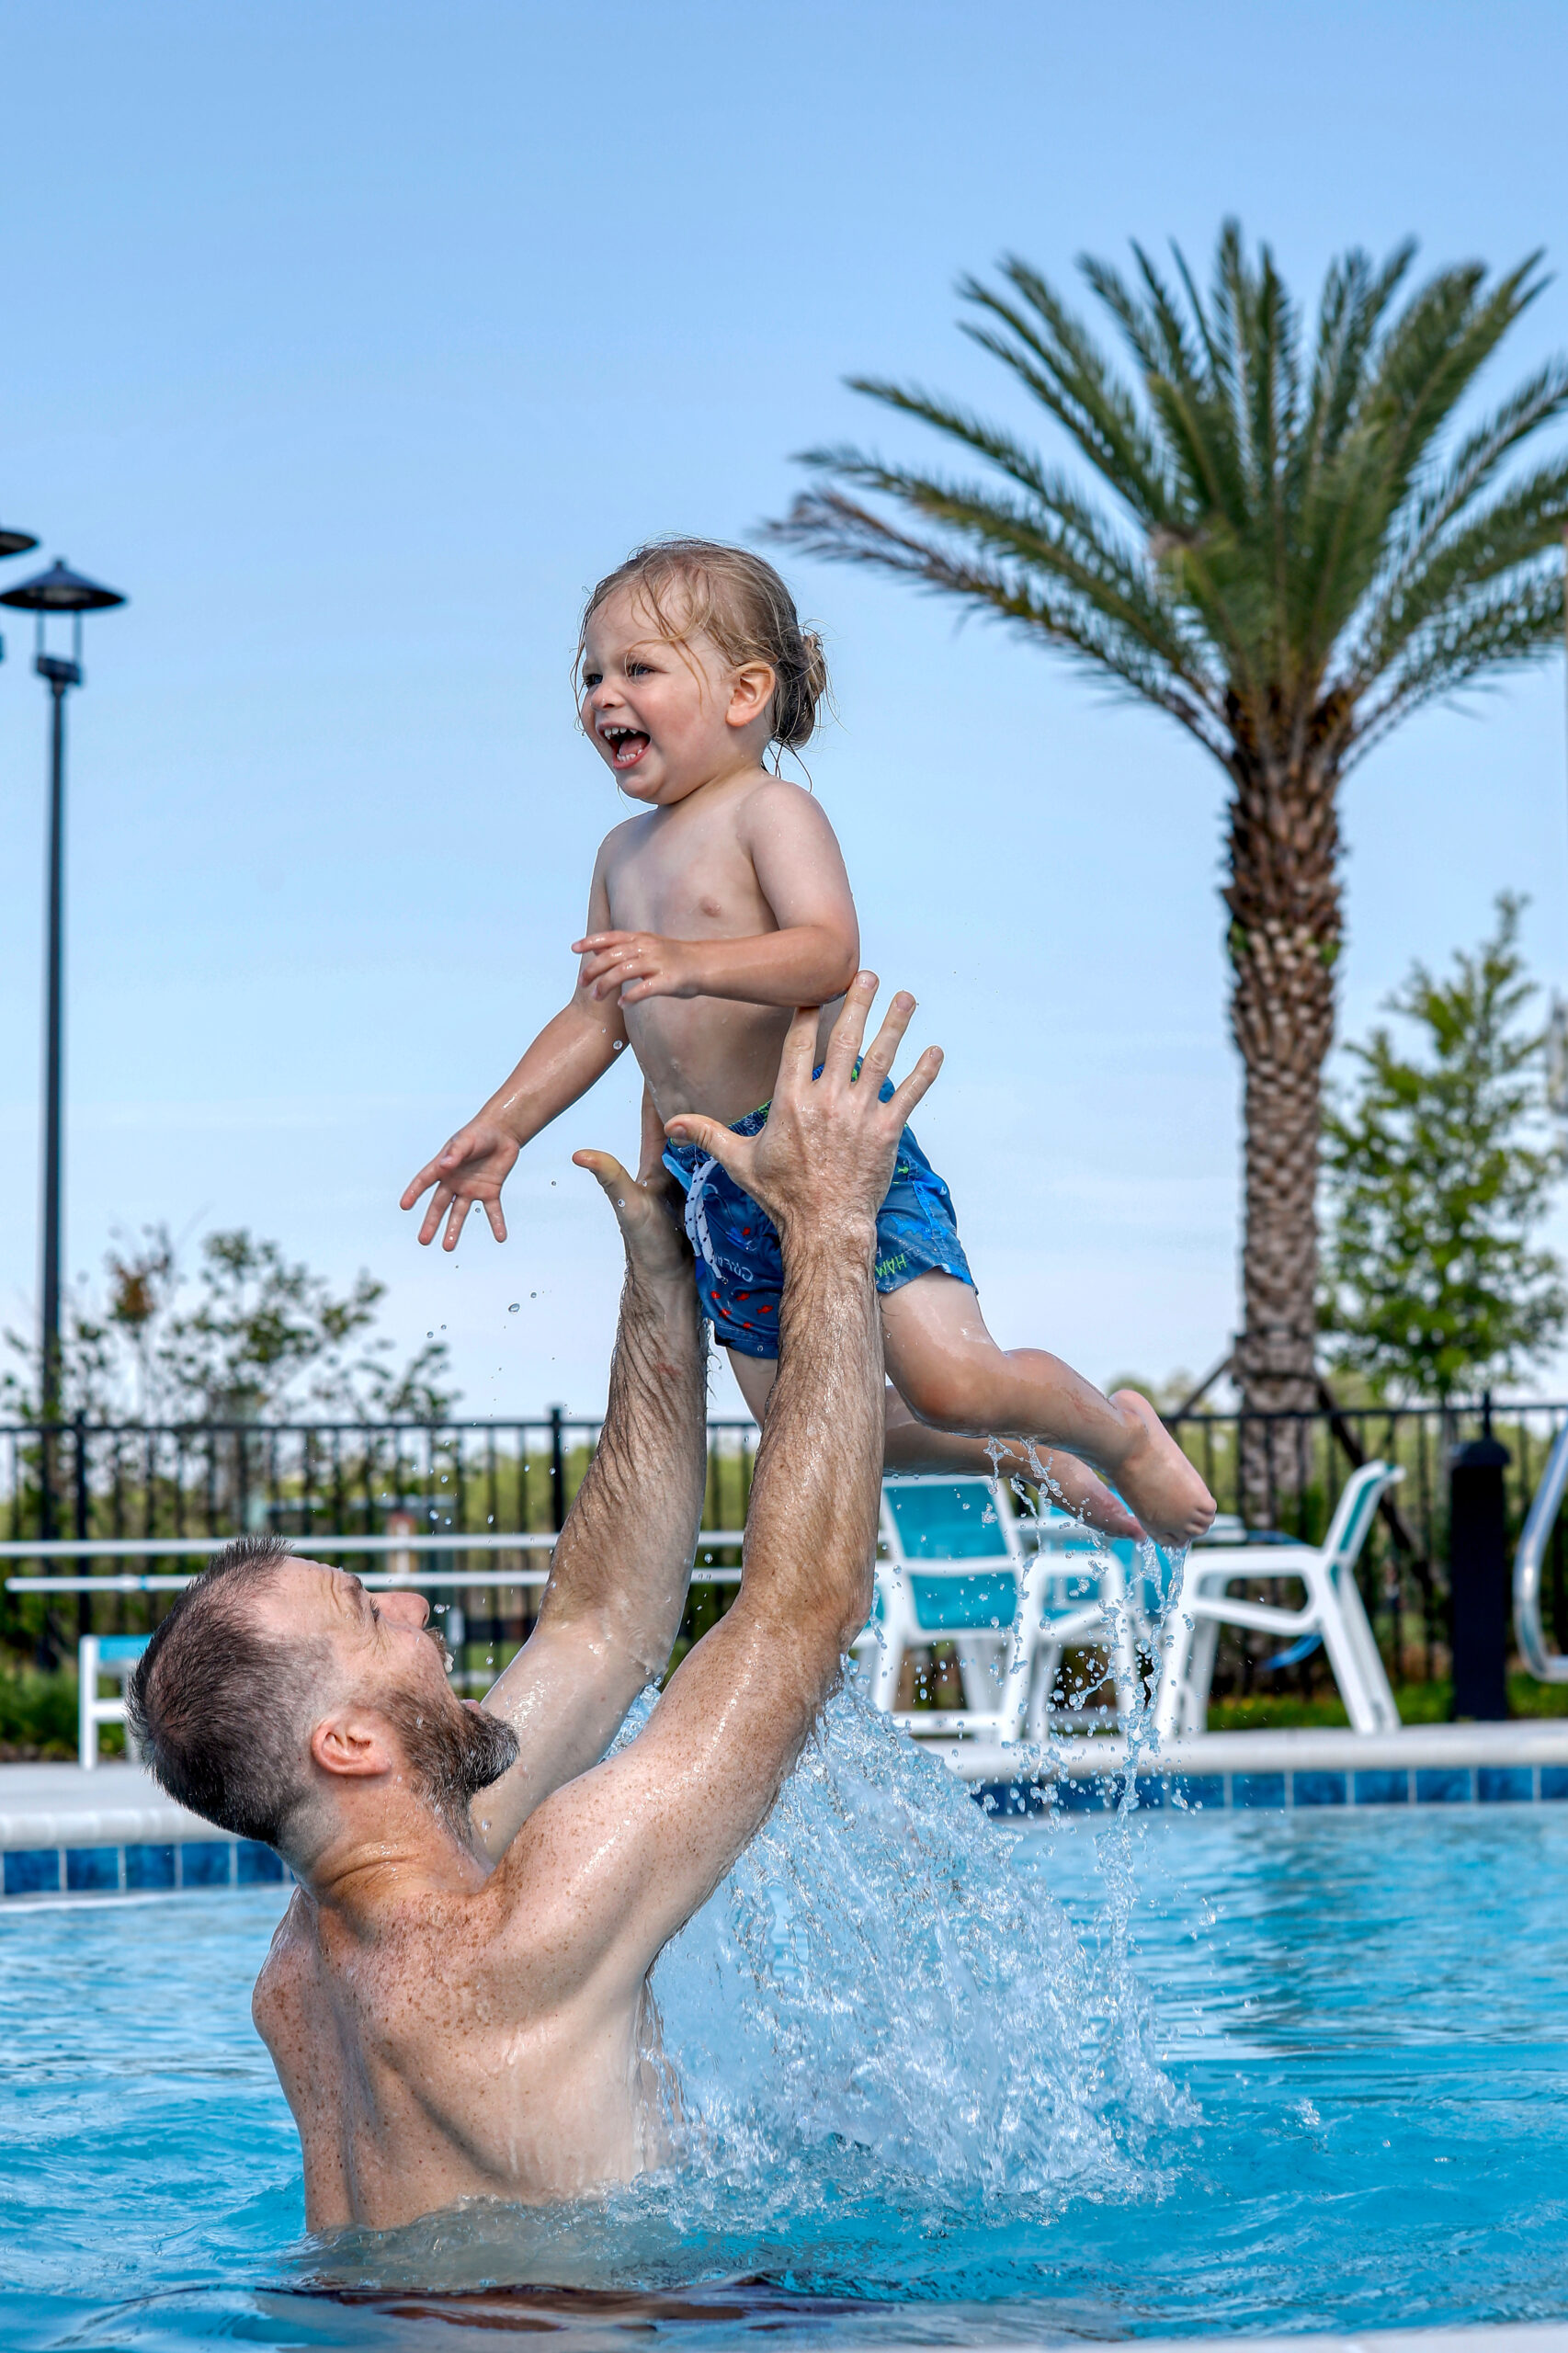 A man playing with his son in a swimming pool.